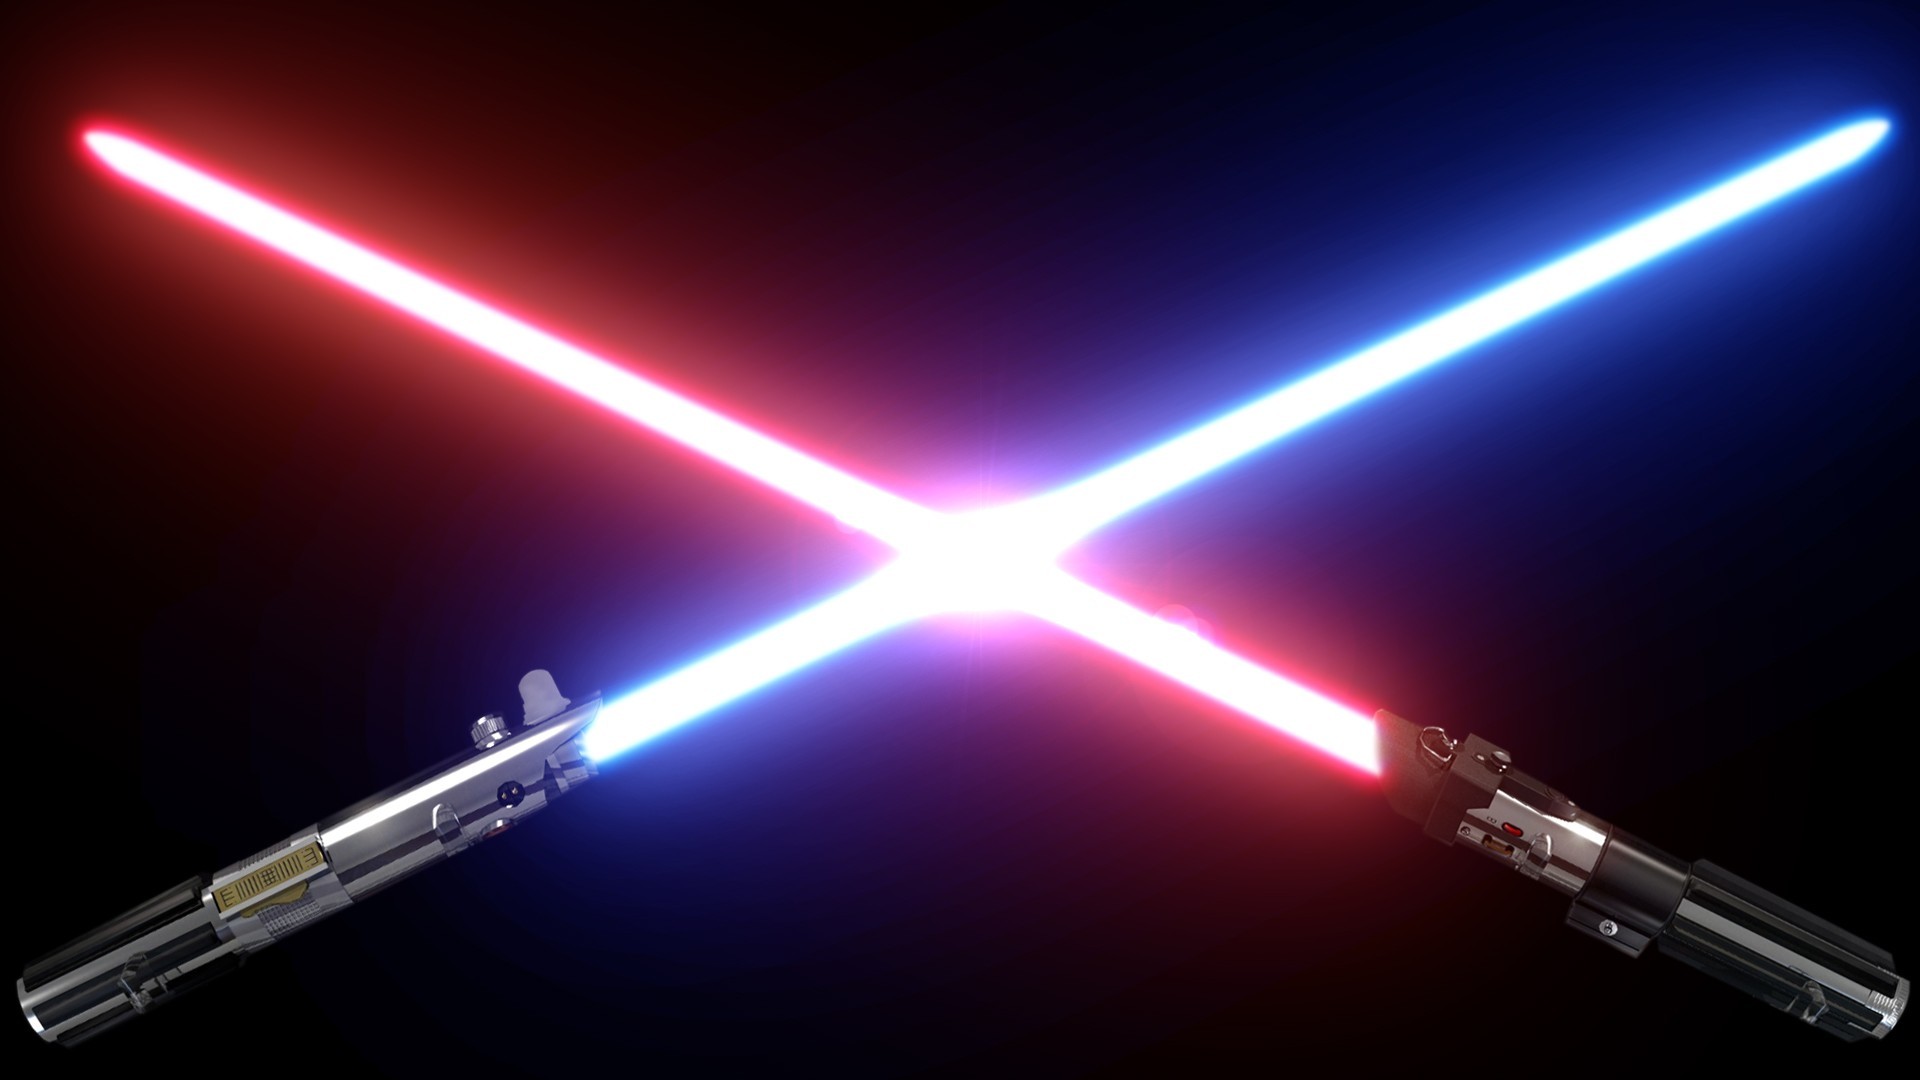 Ps3 Wallpaper Hd Backgrounds Download Free High Definition - Blue And Red Lightsabers - HD Wallpaper 